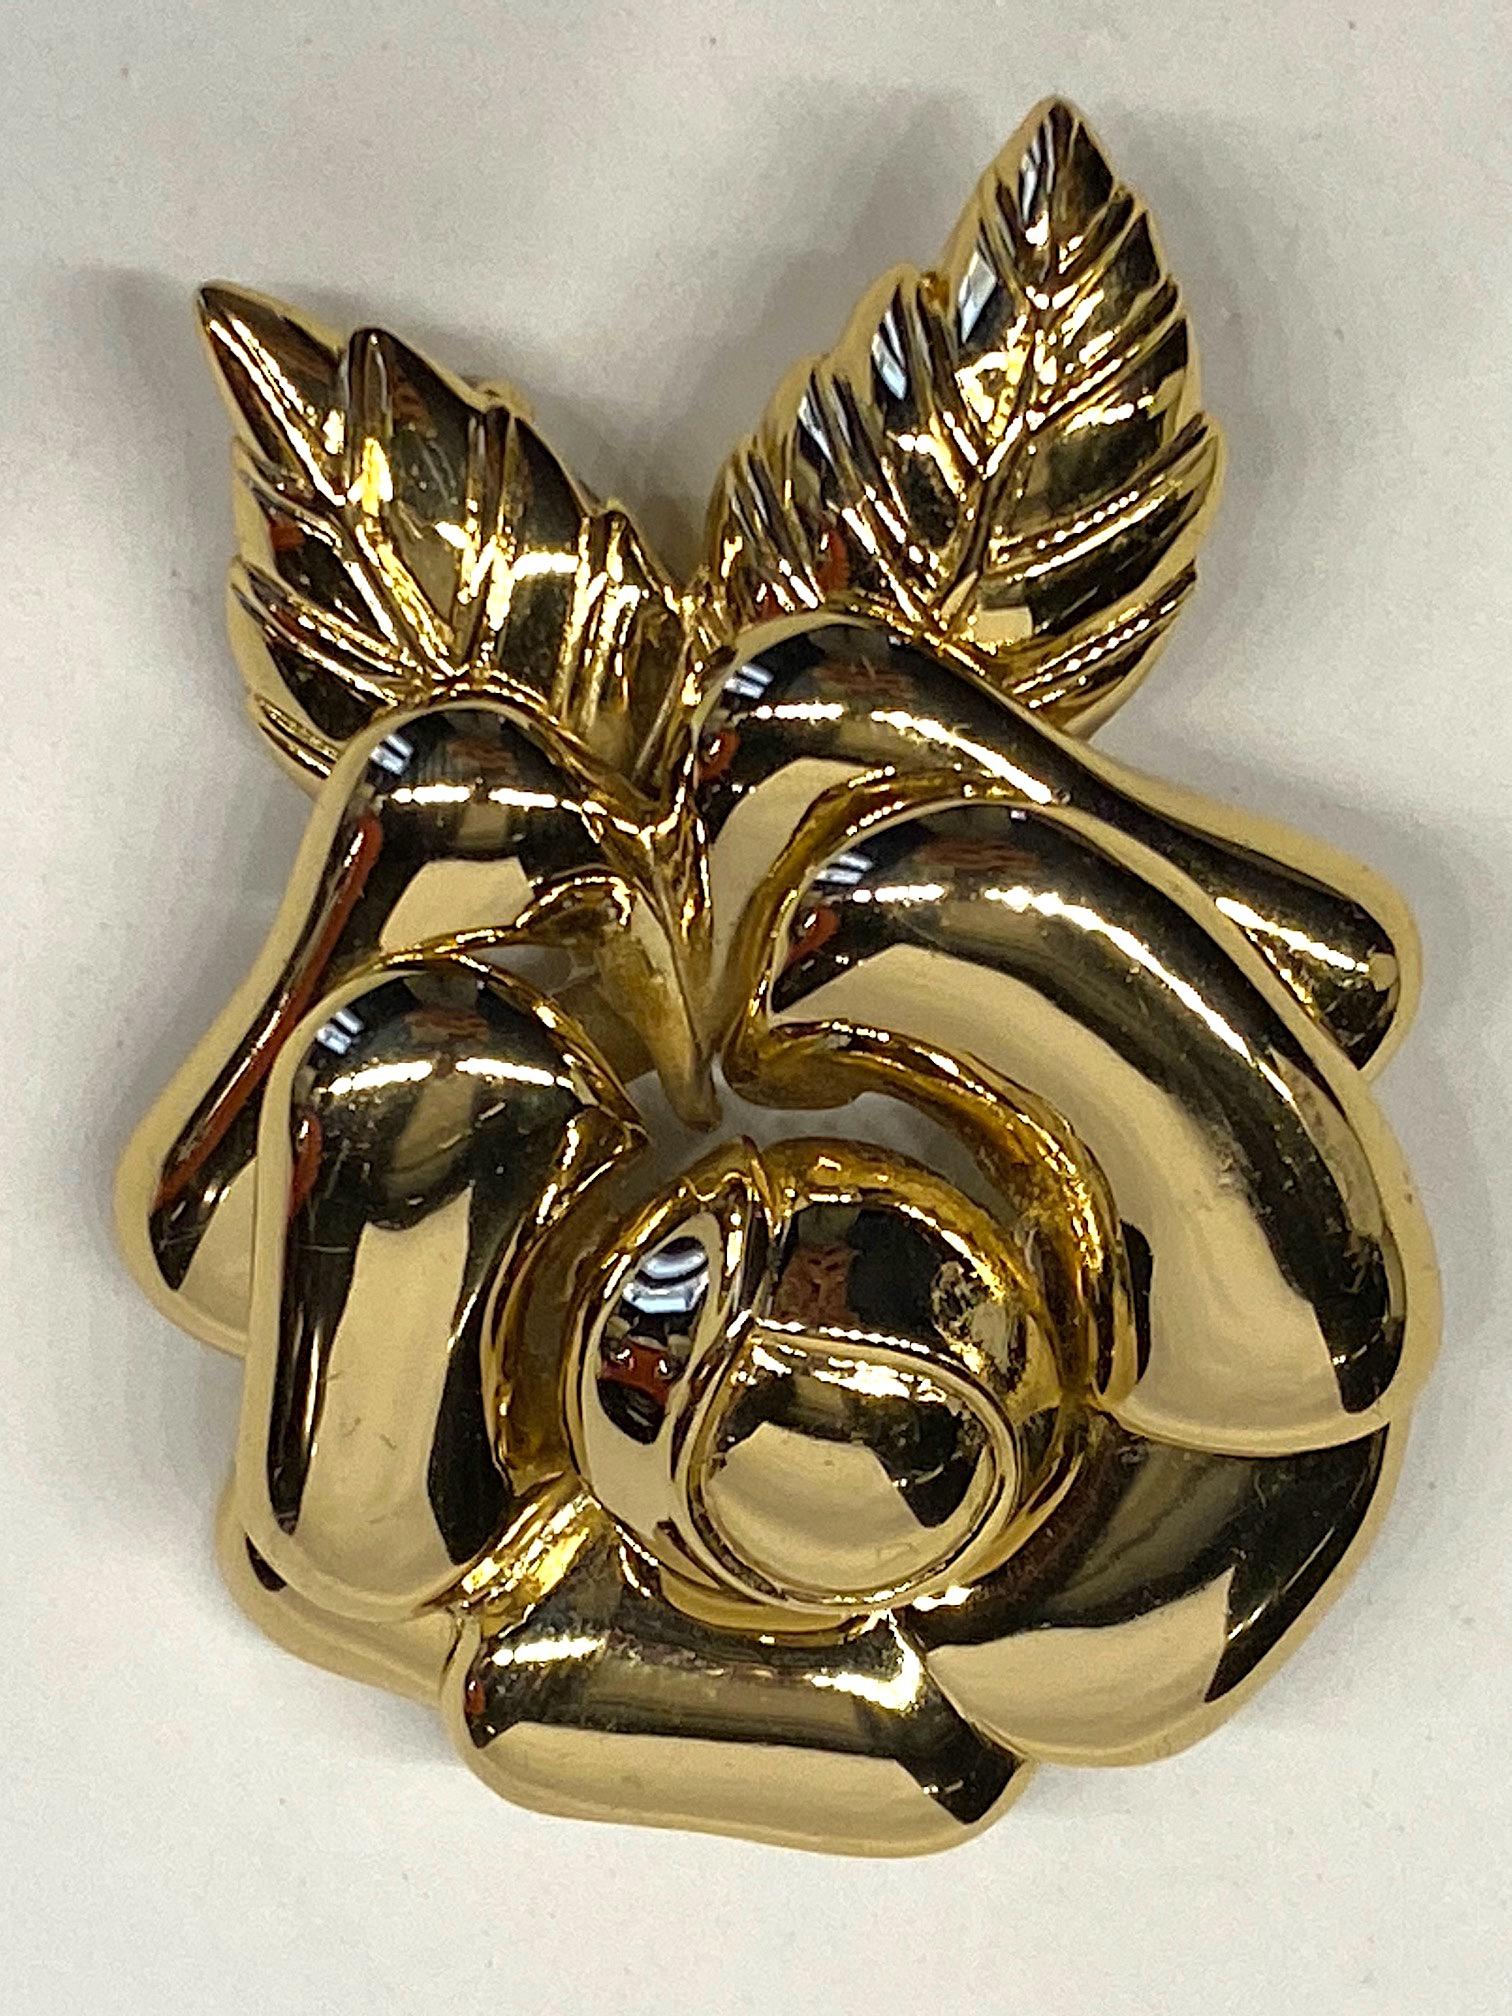 Lovely three dimensional gold plate rose brooch from New York fashion jewelry company Ciner. The brooch was meticulously cast in several pieces and hand soldered together and gold plated. All work is done in the NYC showroom and production center.